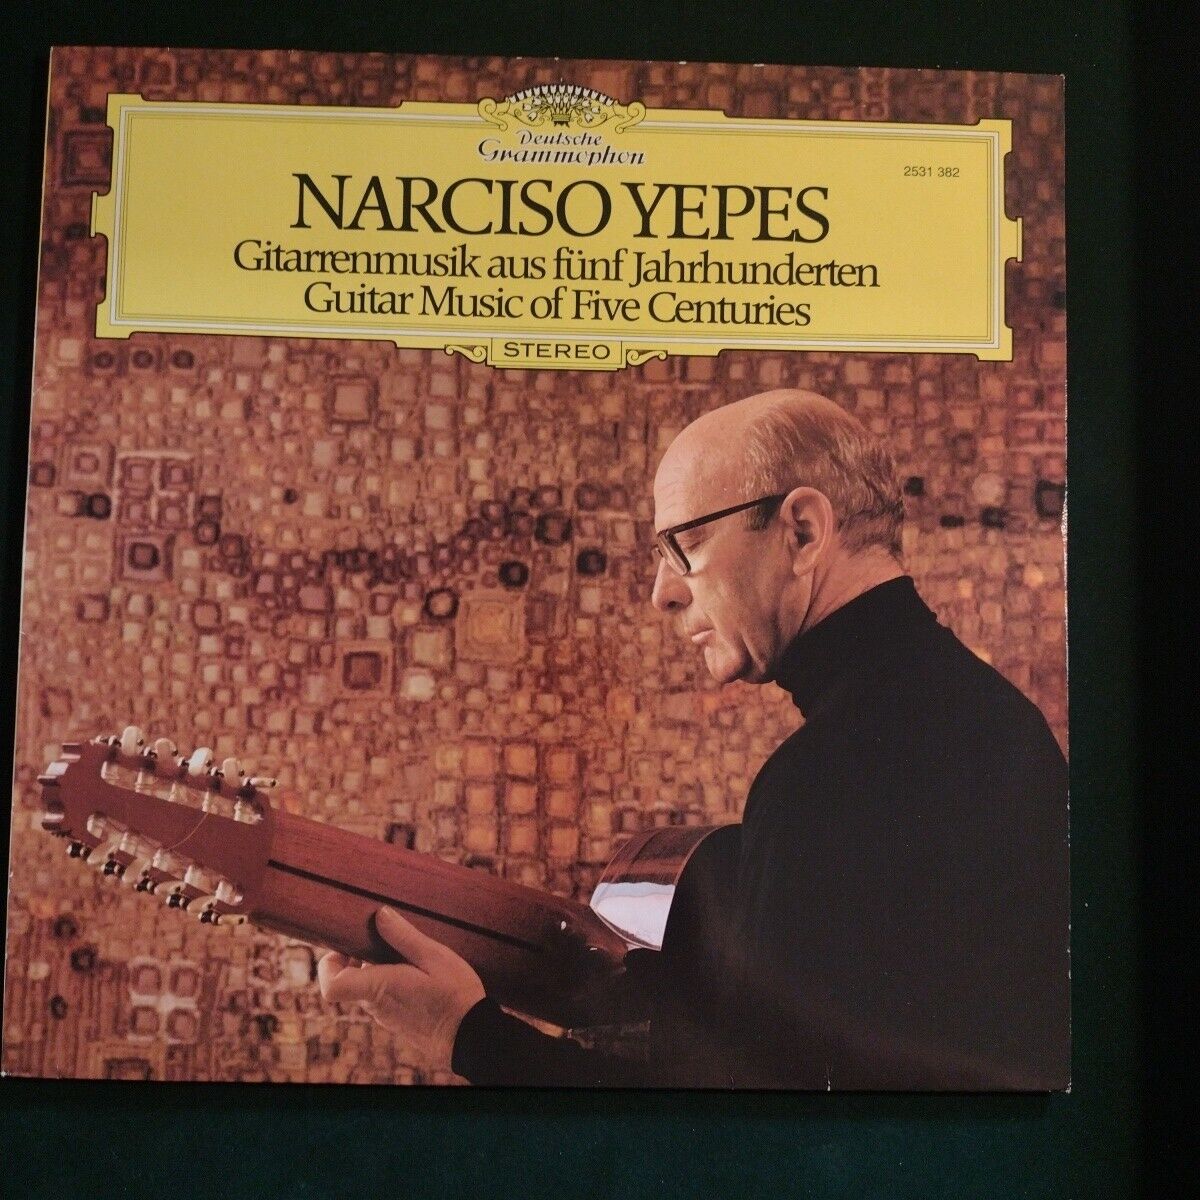 Narciso Yepes - Guitar Music Of Five Centuries (vinyl LP 1982) West Germany 